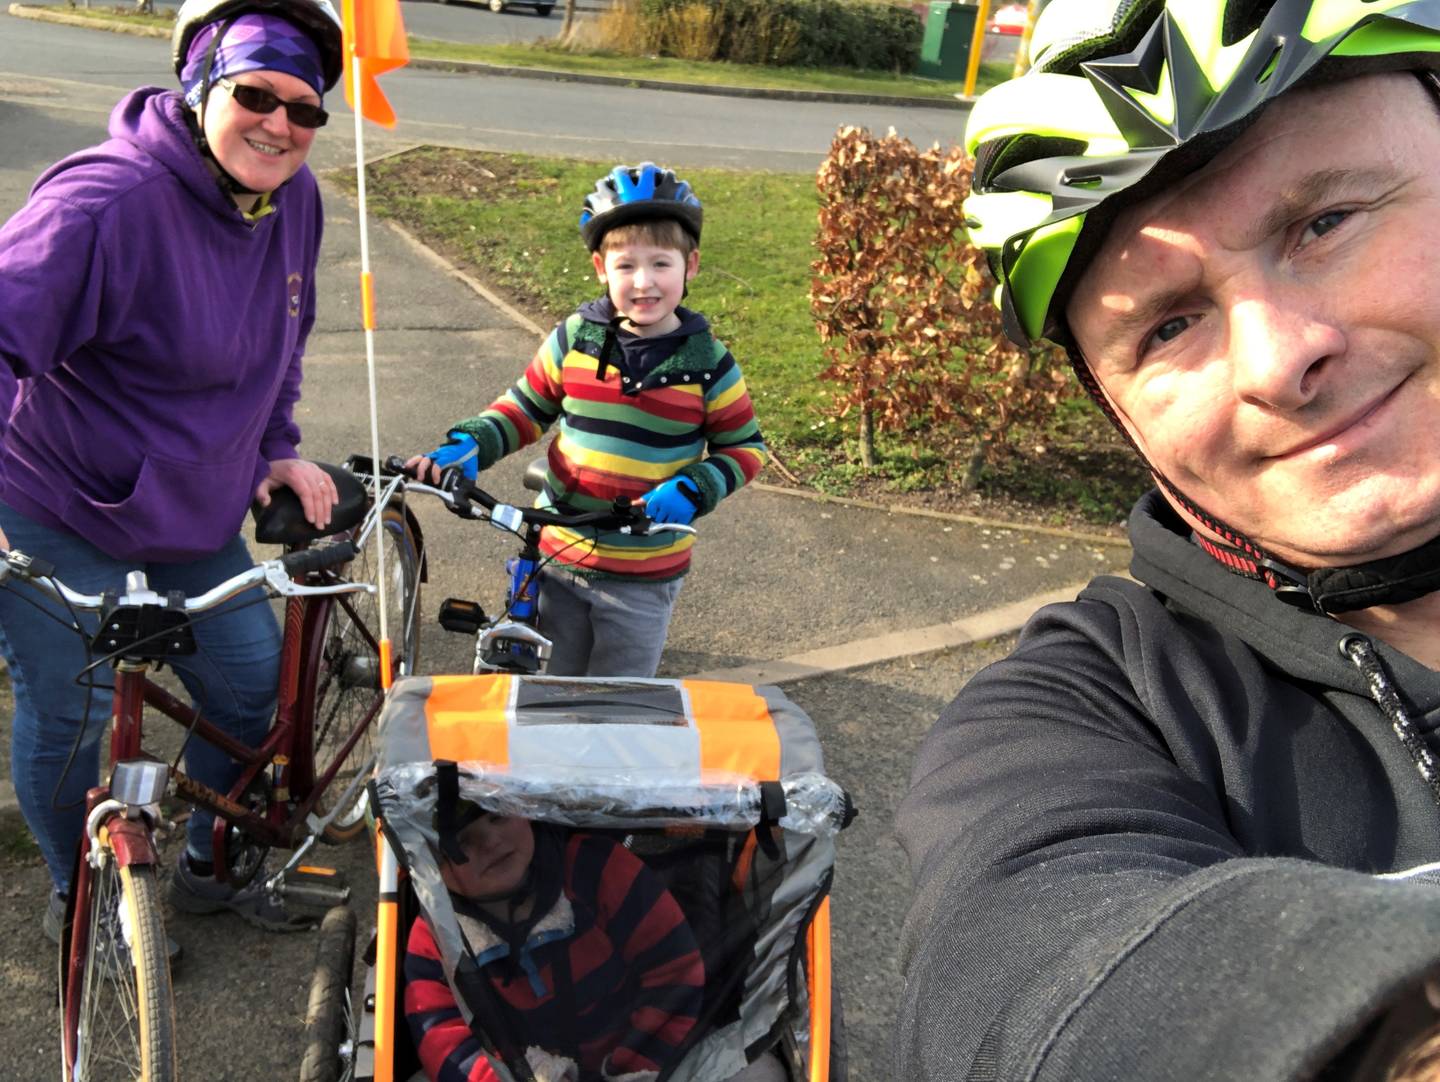 Mark, his wife and children using adapted bikes